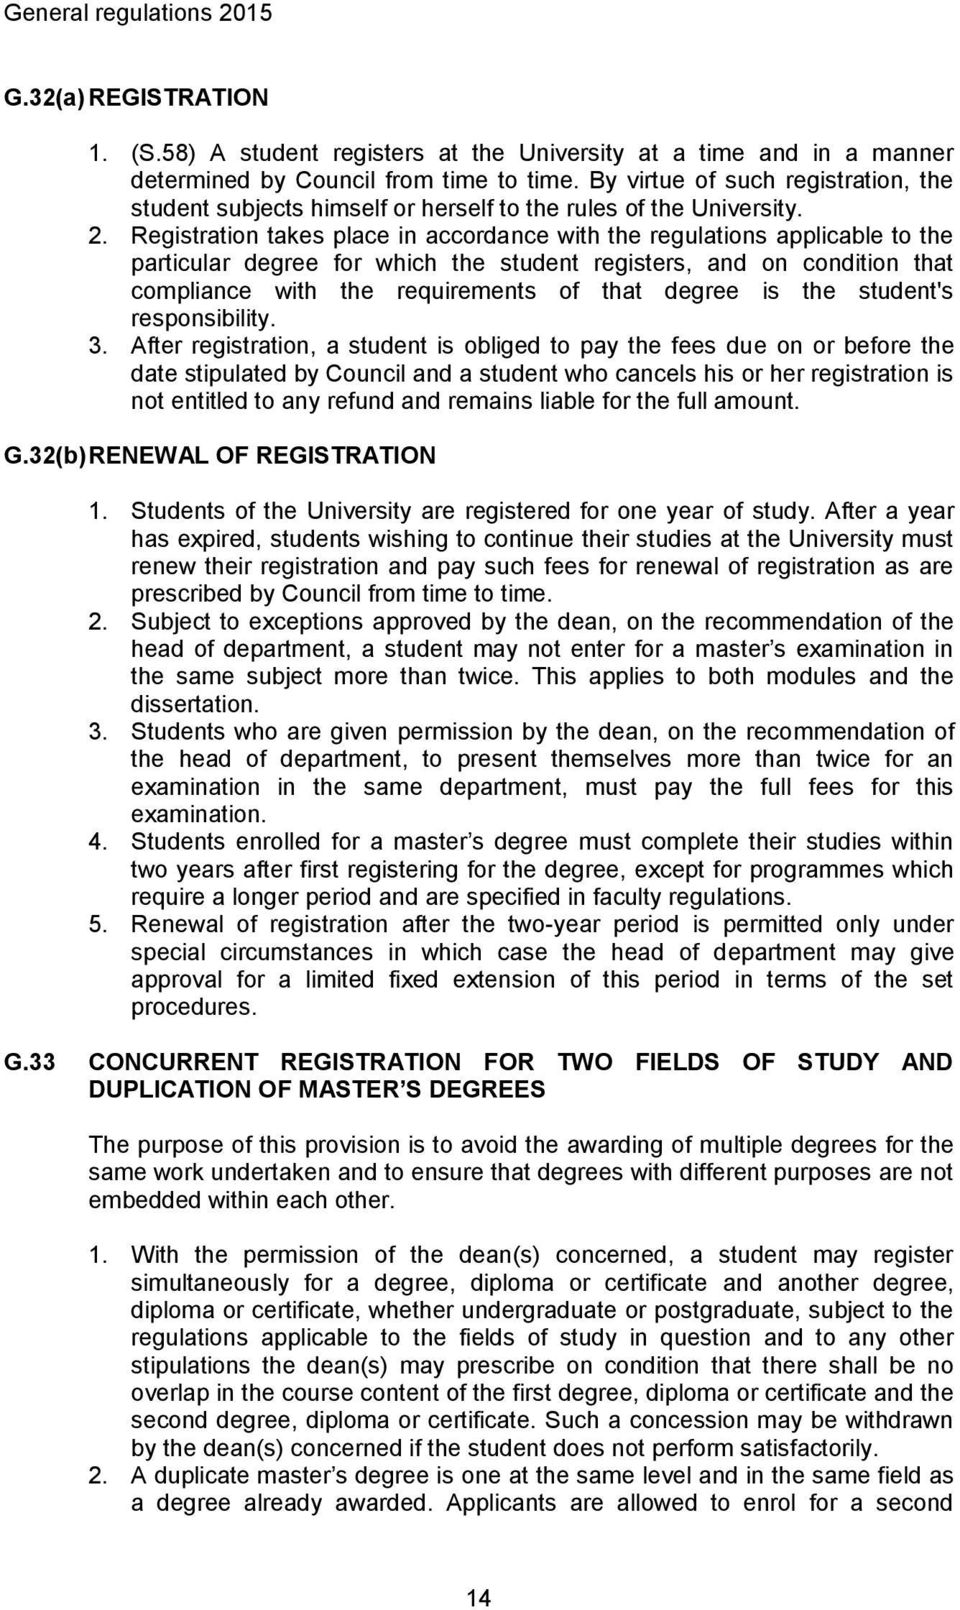 Registration takes place in accordance with the regulations applicable to the particular degree for which the student registers, and on condition that compliance with the requirements of that degree